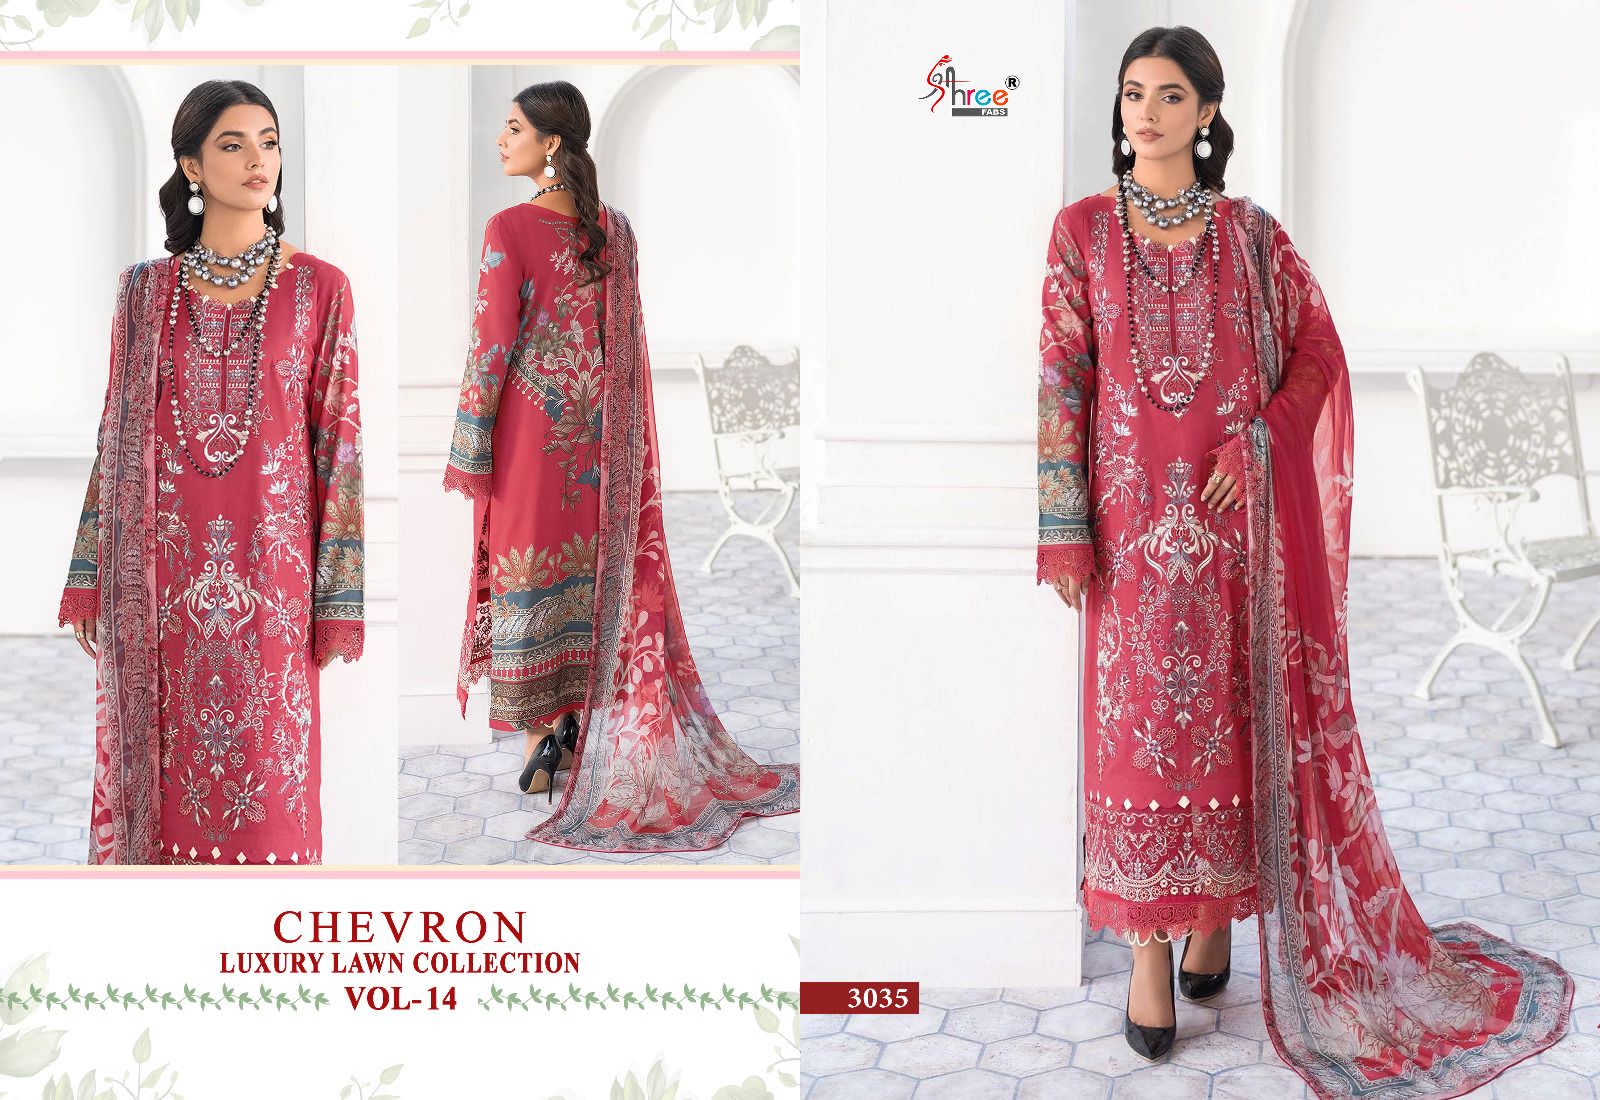 Shree Chevron Luxury Lawn Collection Vol 14 collection 3